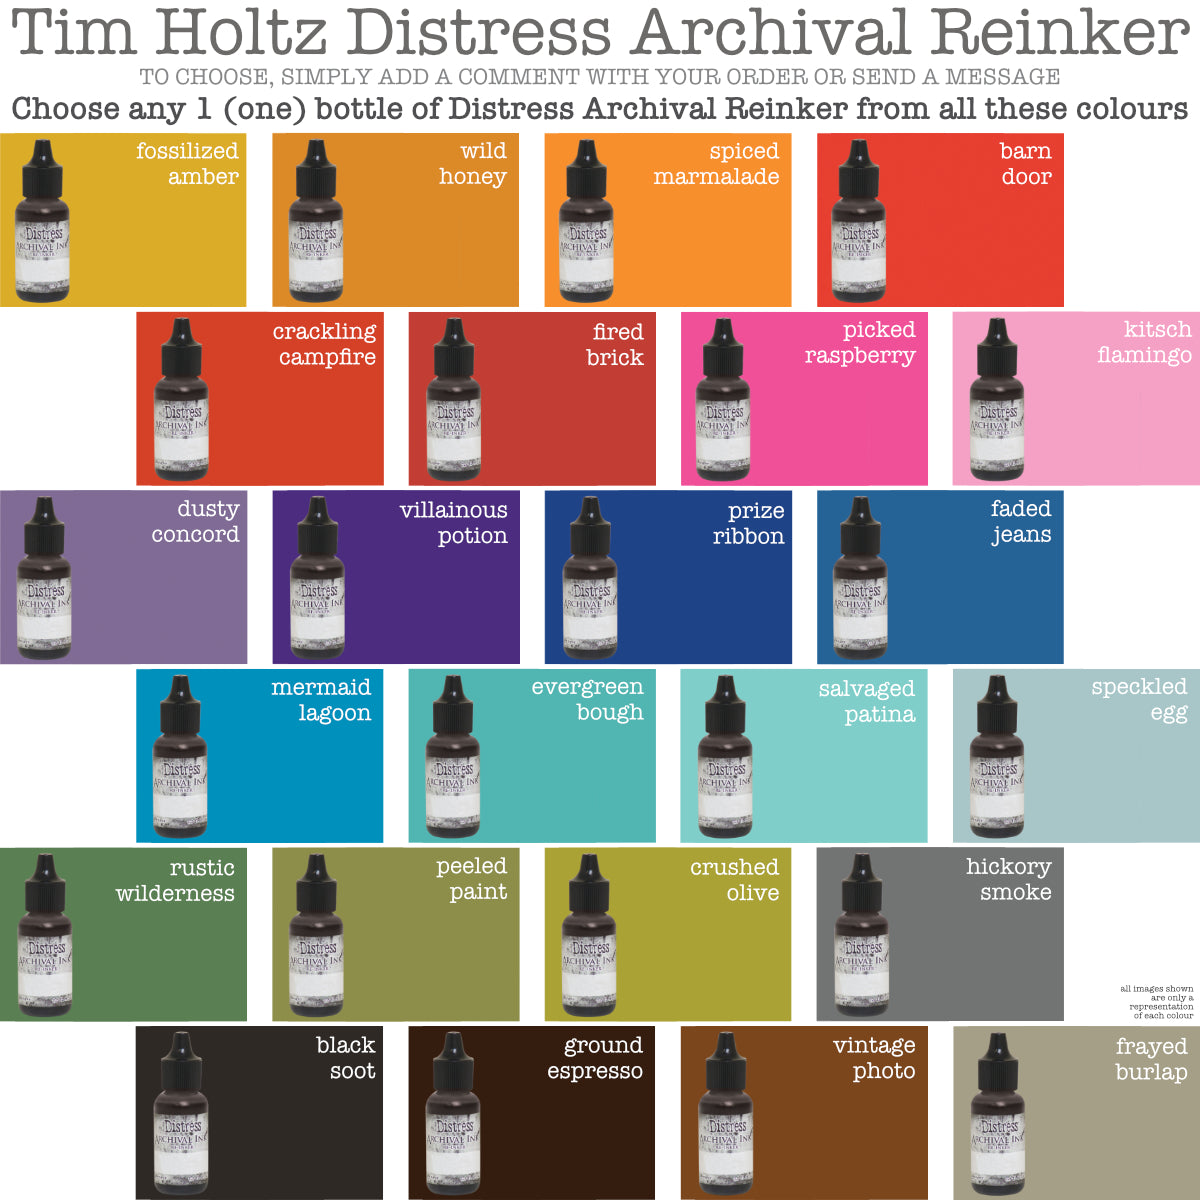 Tim Holtz Distress Archival Ink Reinker Refill Bottles for sale at Art by Jenny in Australia, pictured in rainbow order :)